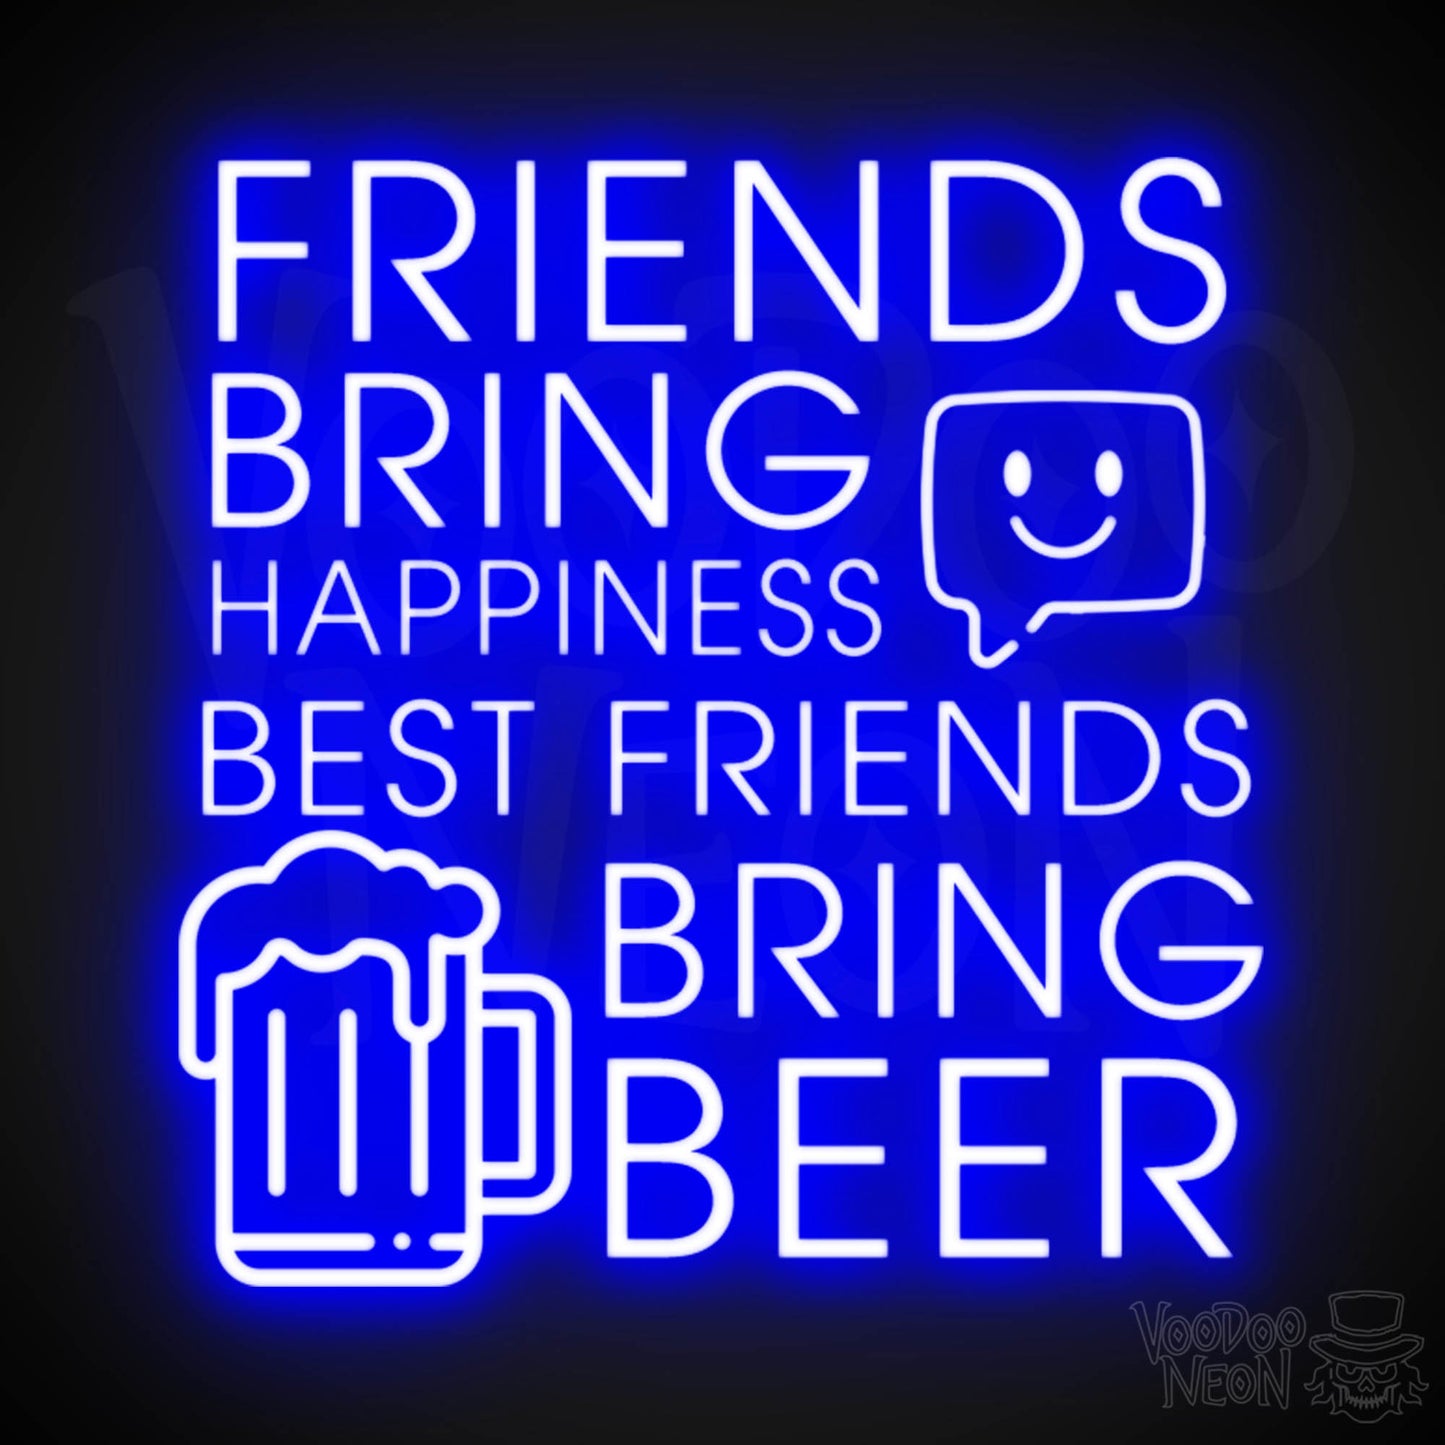 Friends Bring Happiness Best Friends Bring Beer Neon Sign - LED Lights Wall Art - Color Dark Blue